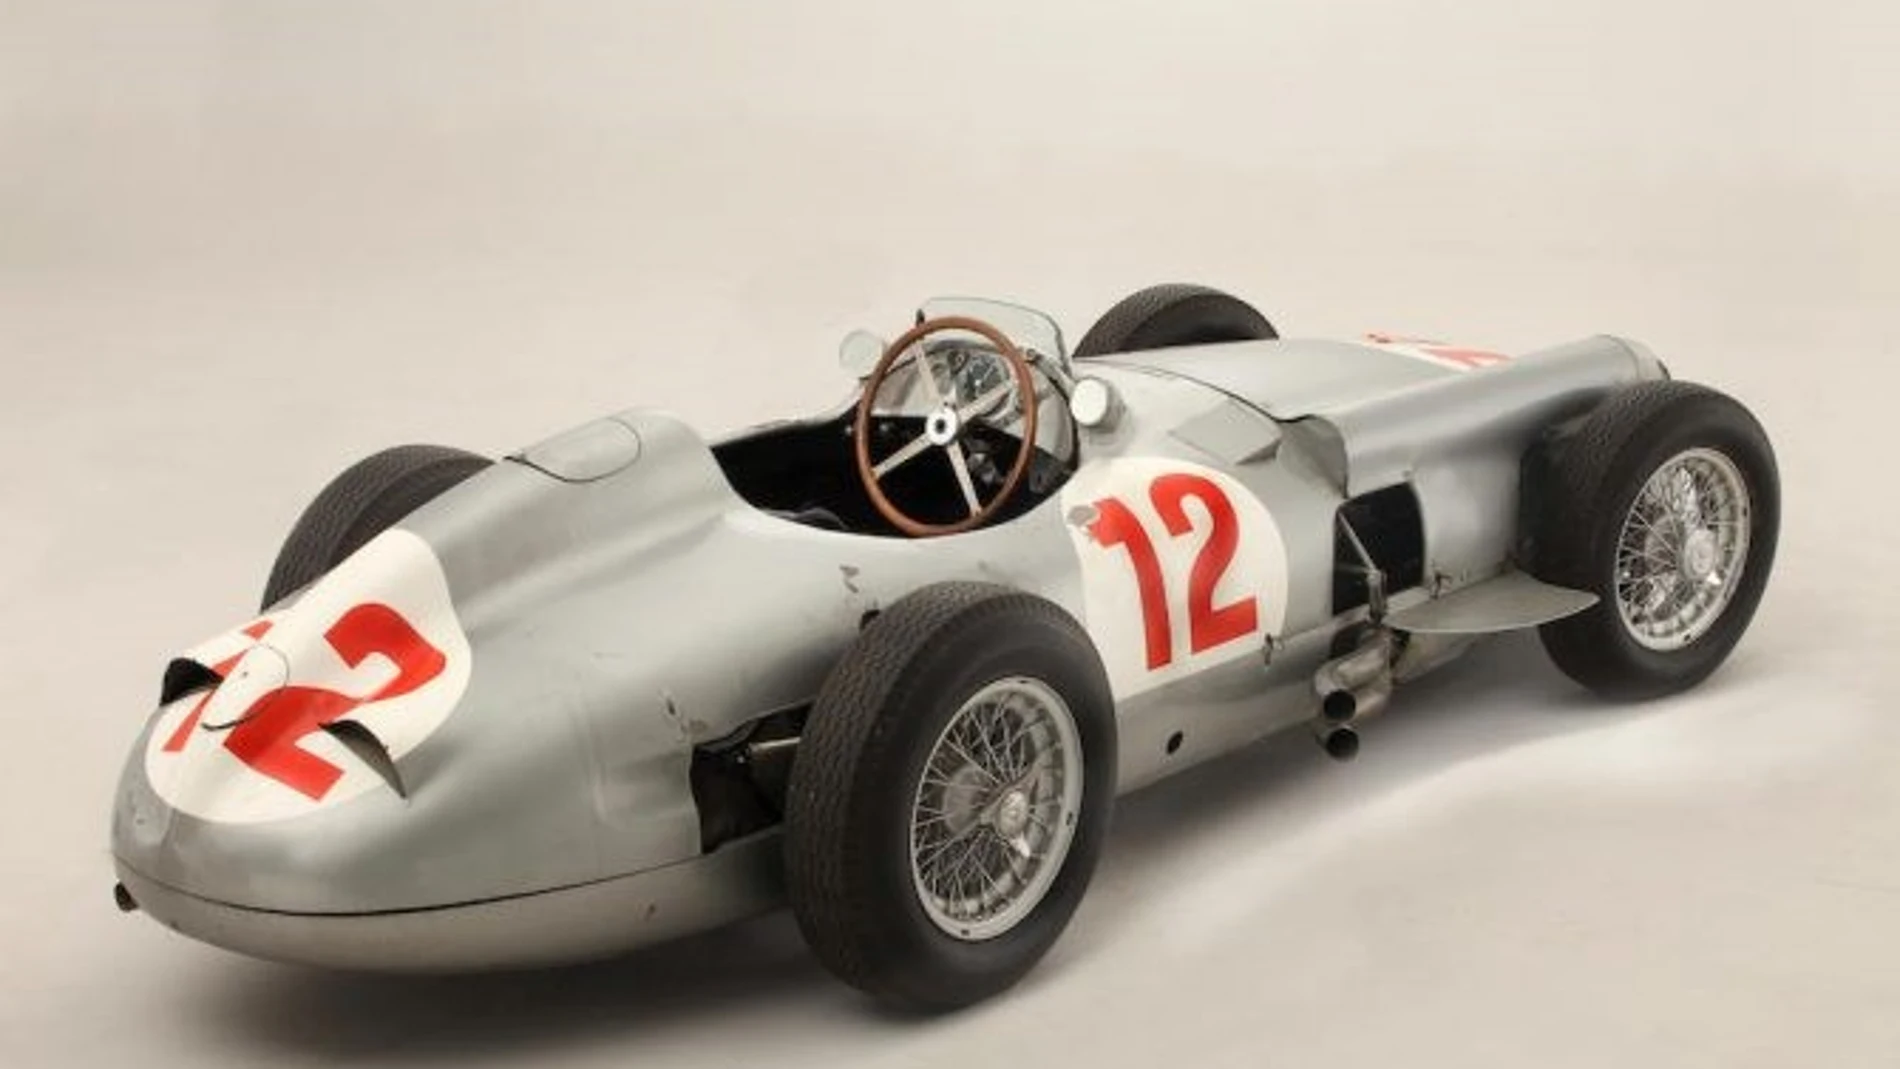 1954 MERCEDES-BENZ W196R FORMULA 1 RACING SINGLE-SEATER CHASSIS NO. 196 010 00006/54